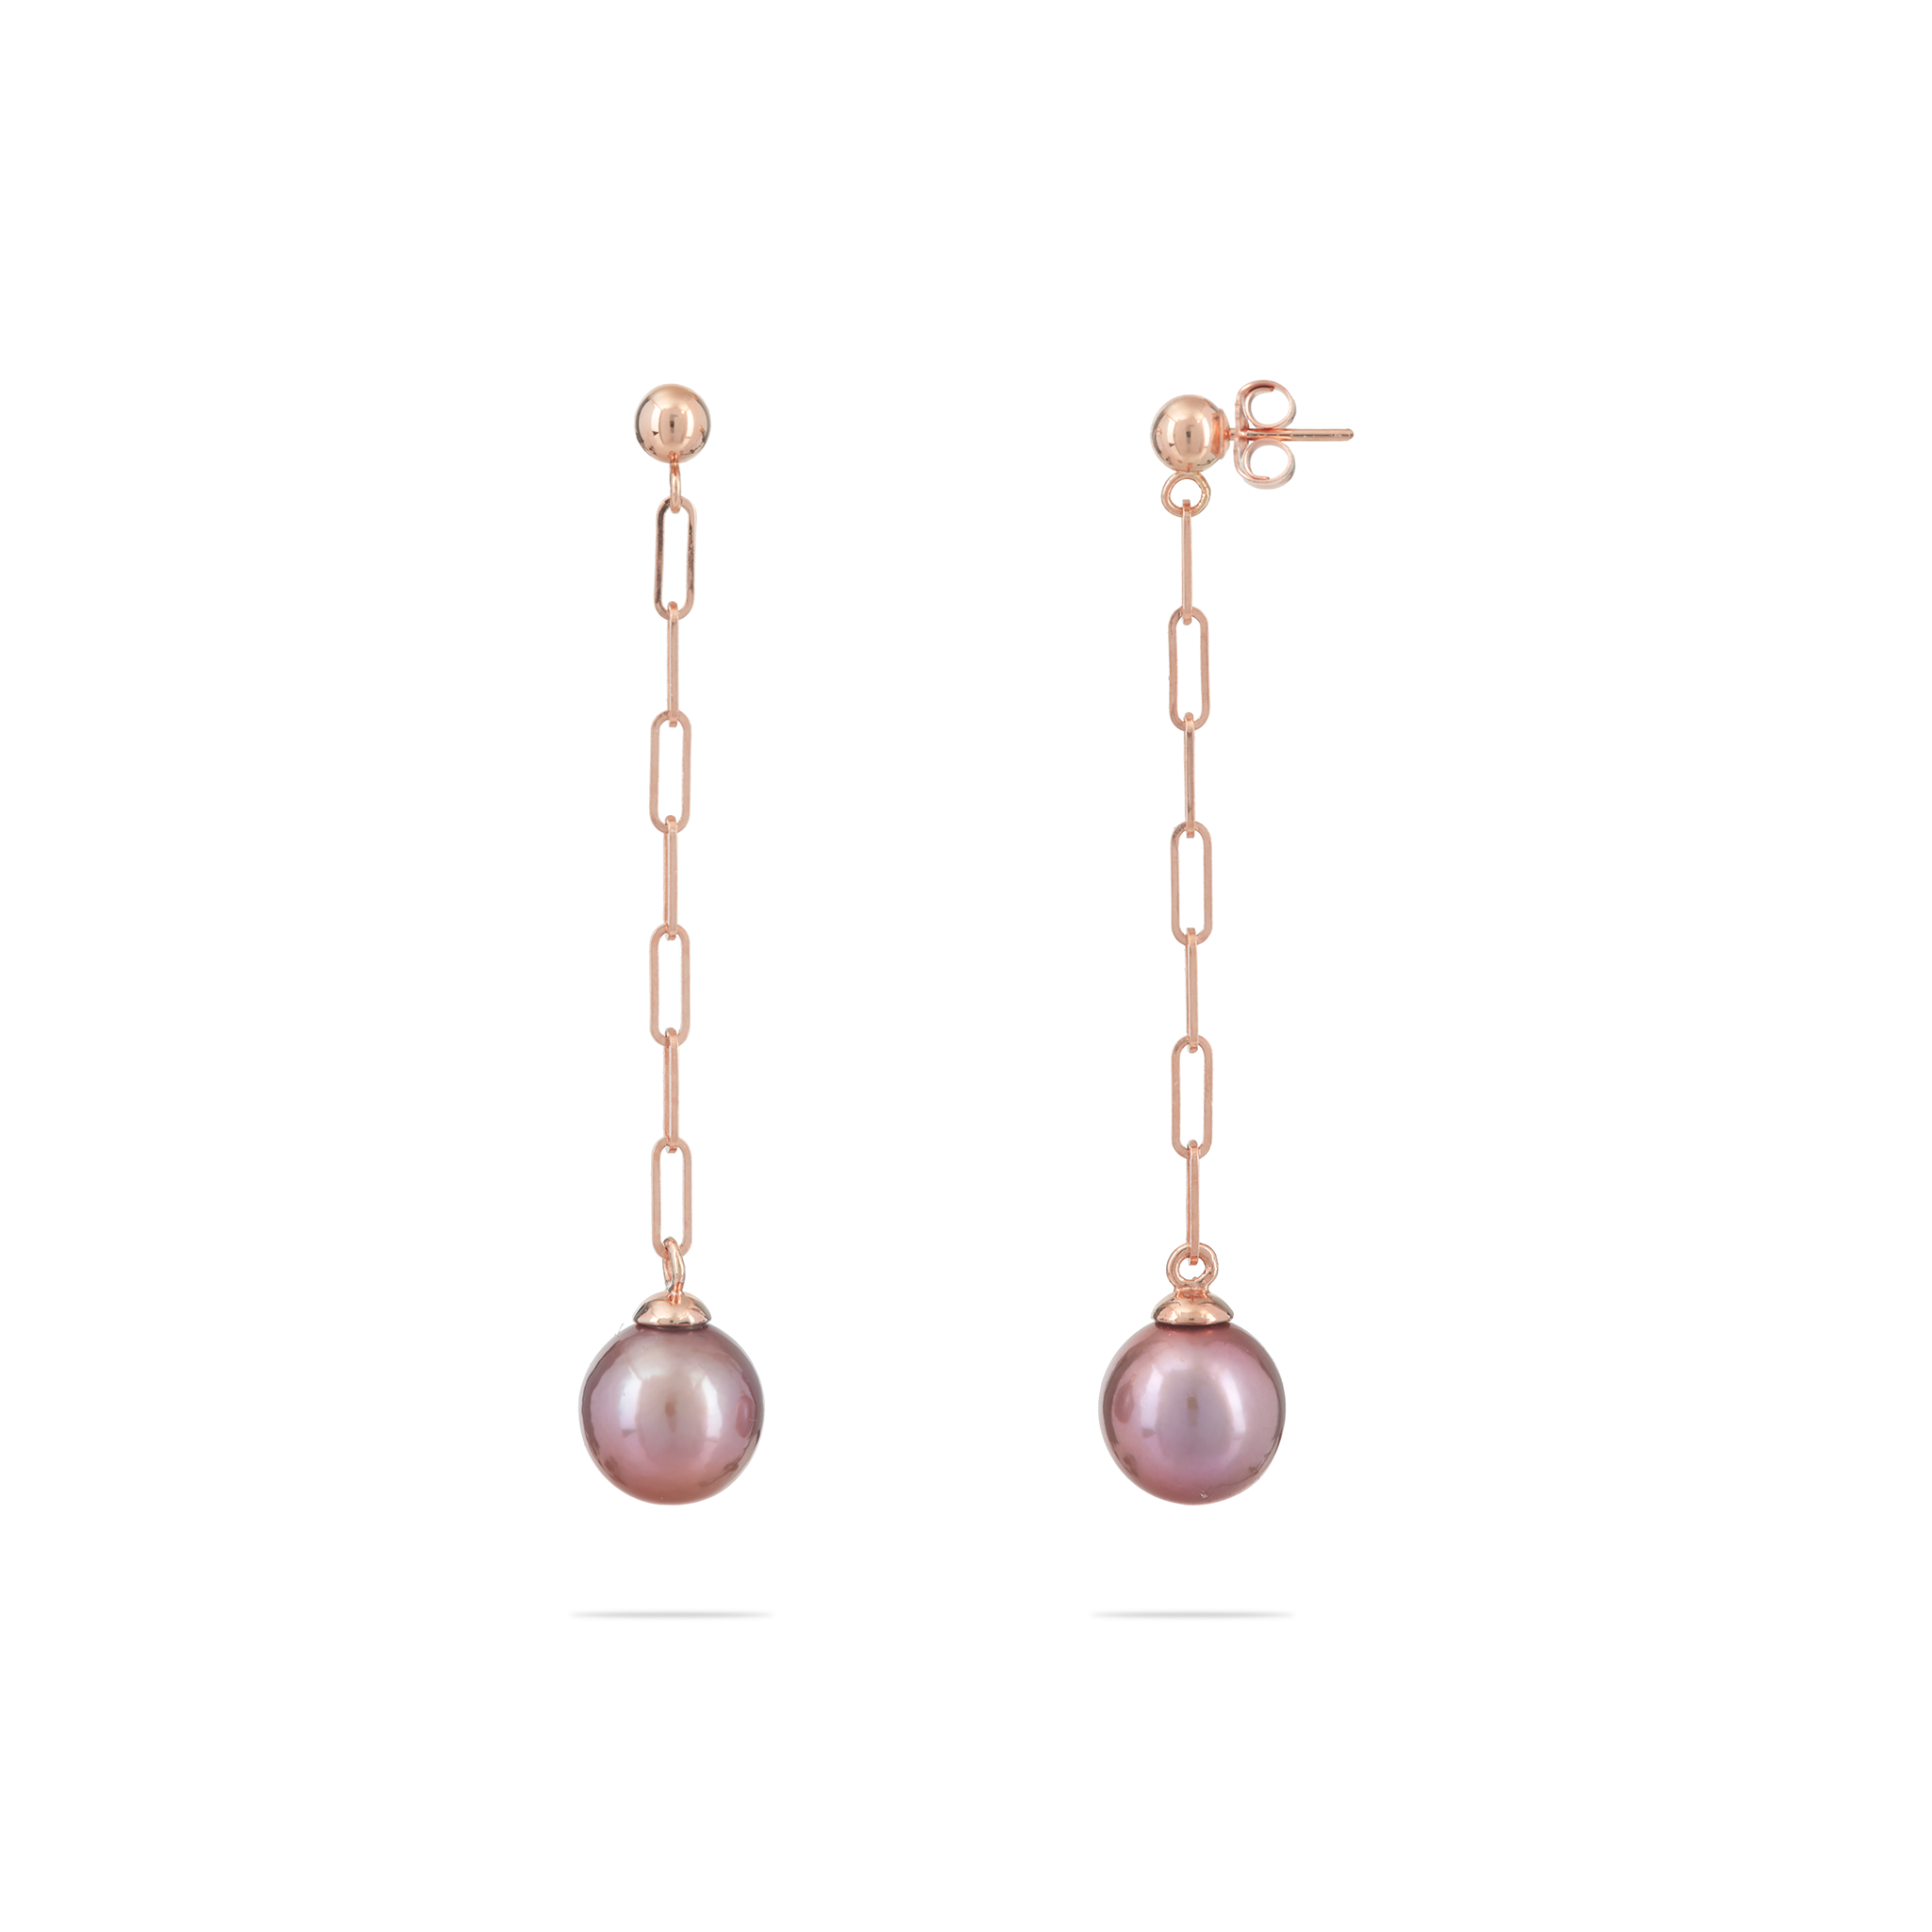 Ultraviolet Freshwater Pearl Paperclip Chain Earrings in Rose Gold - 9-10mm